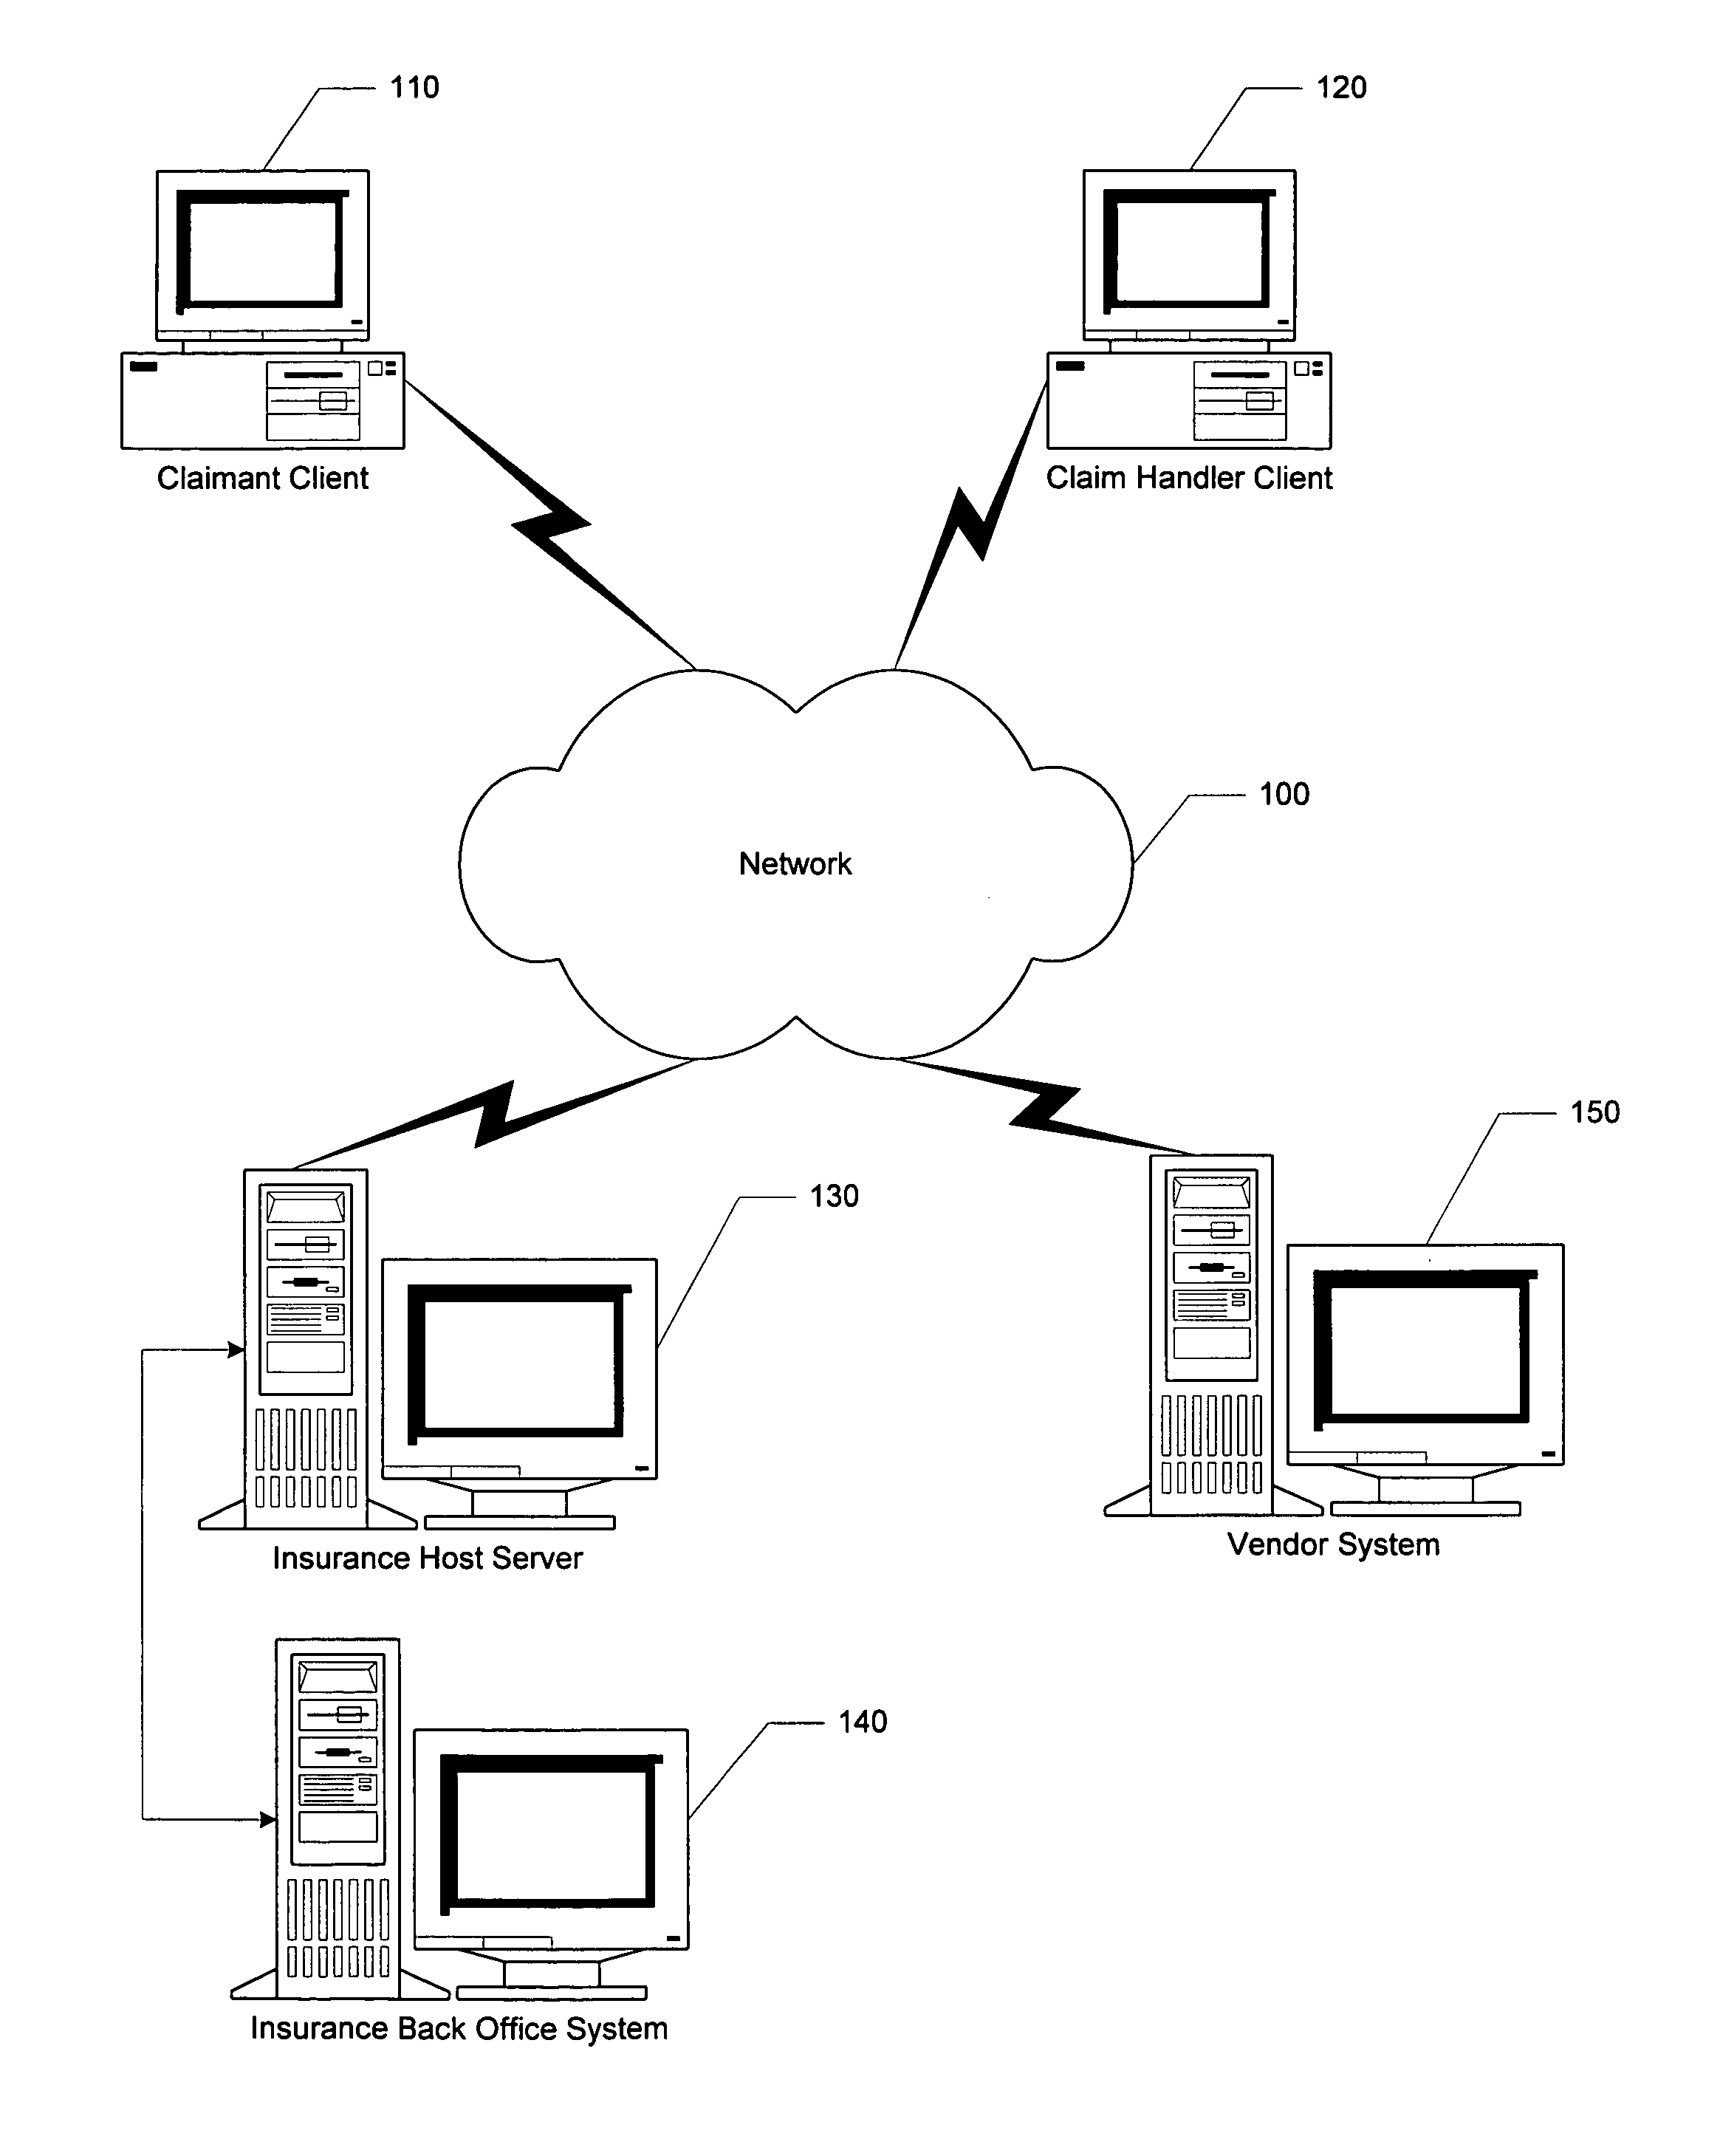 Providing evaluation and processing of line items